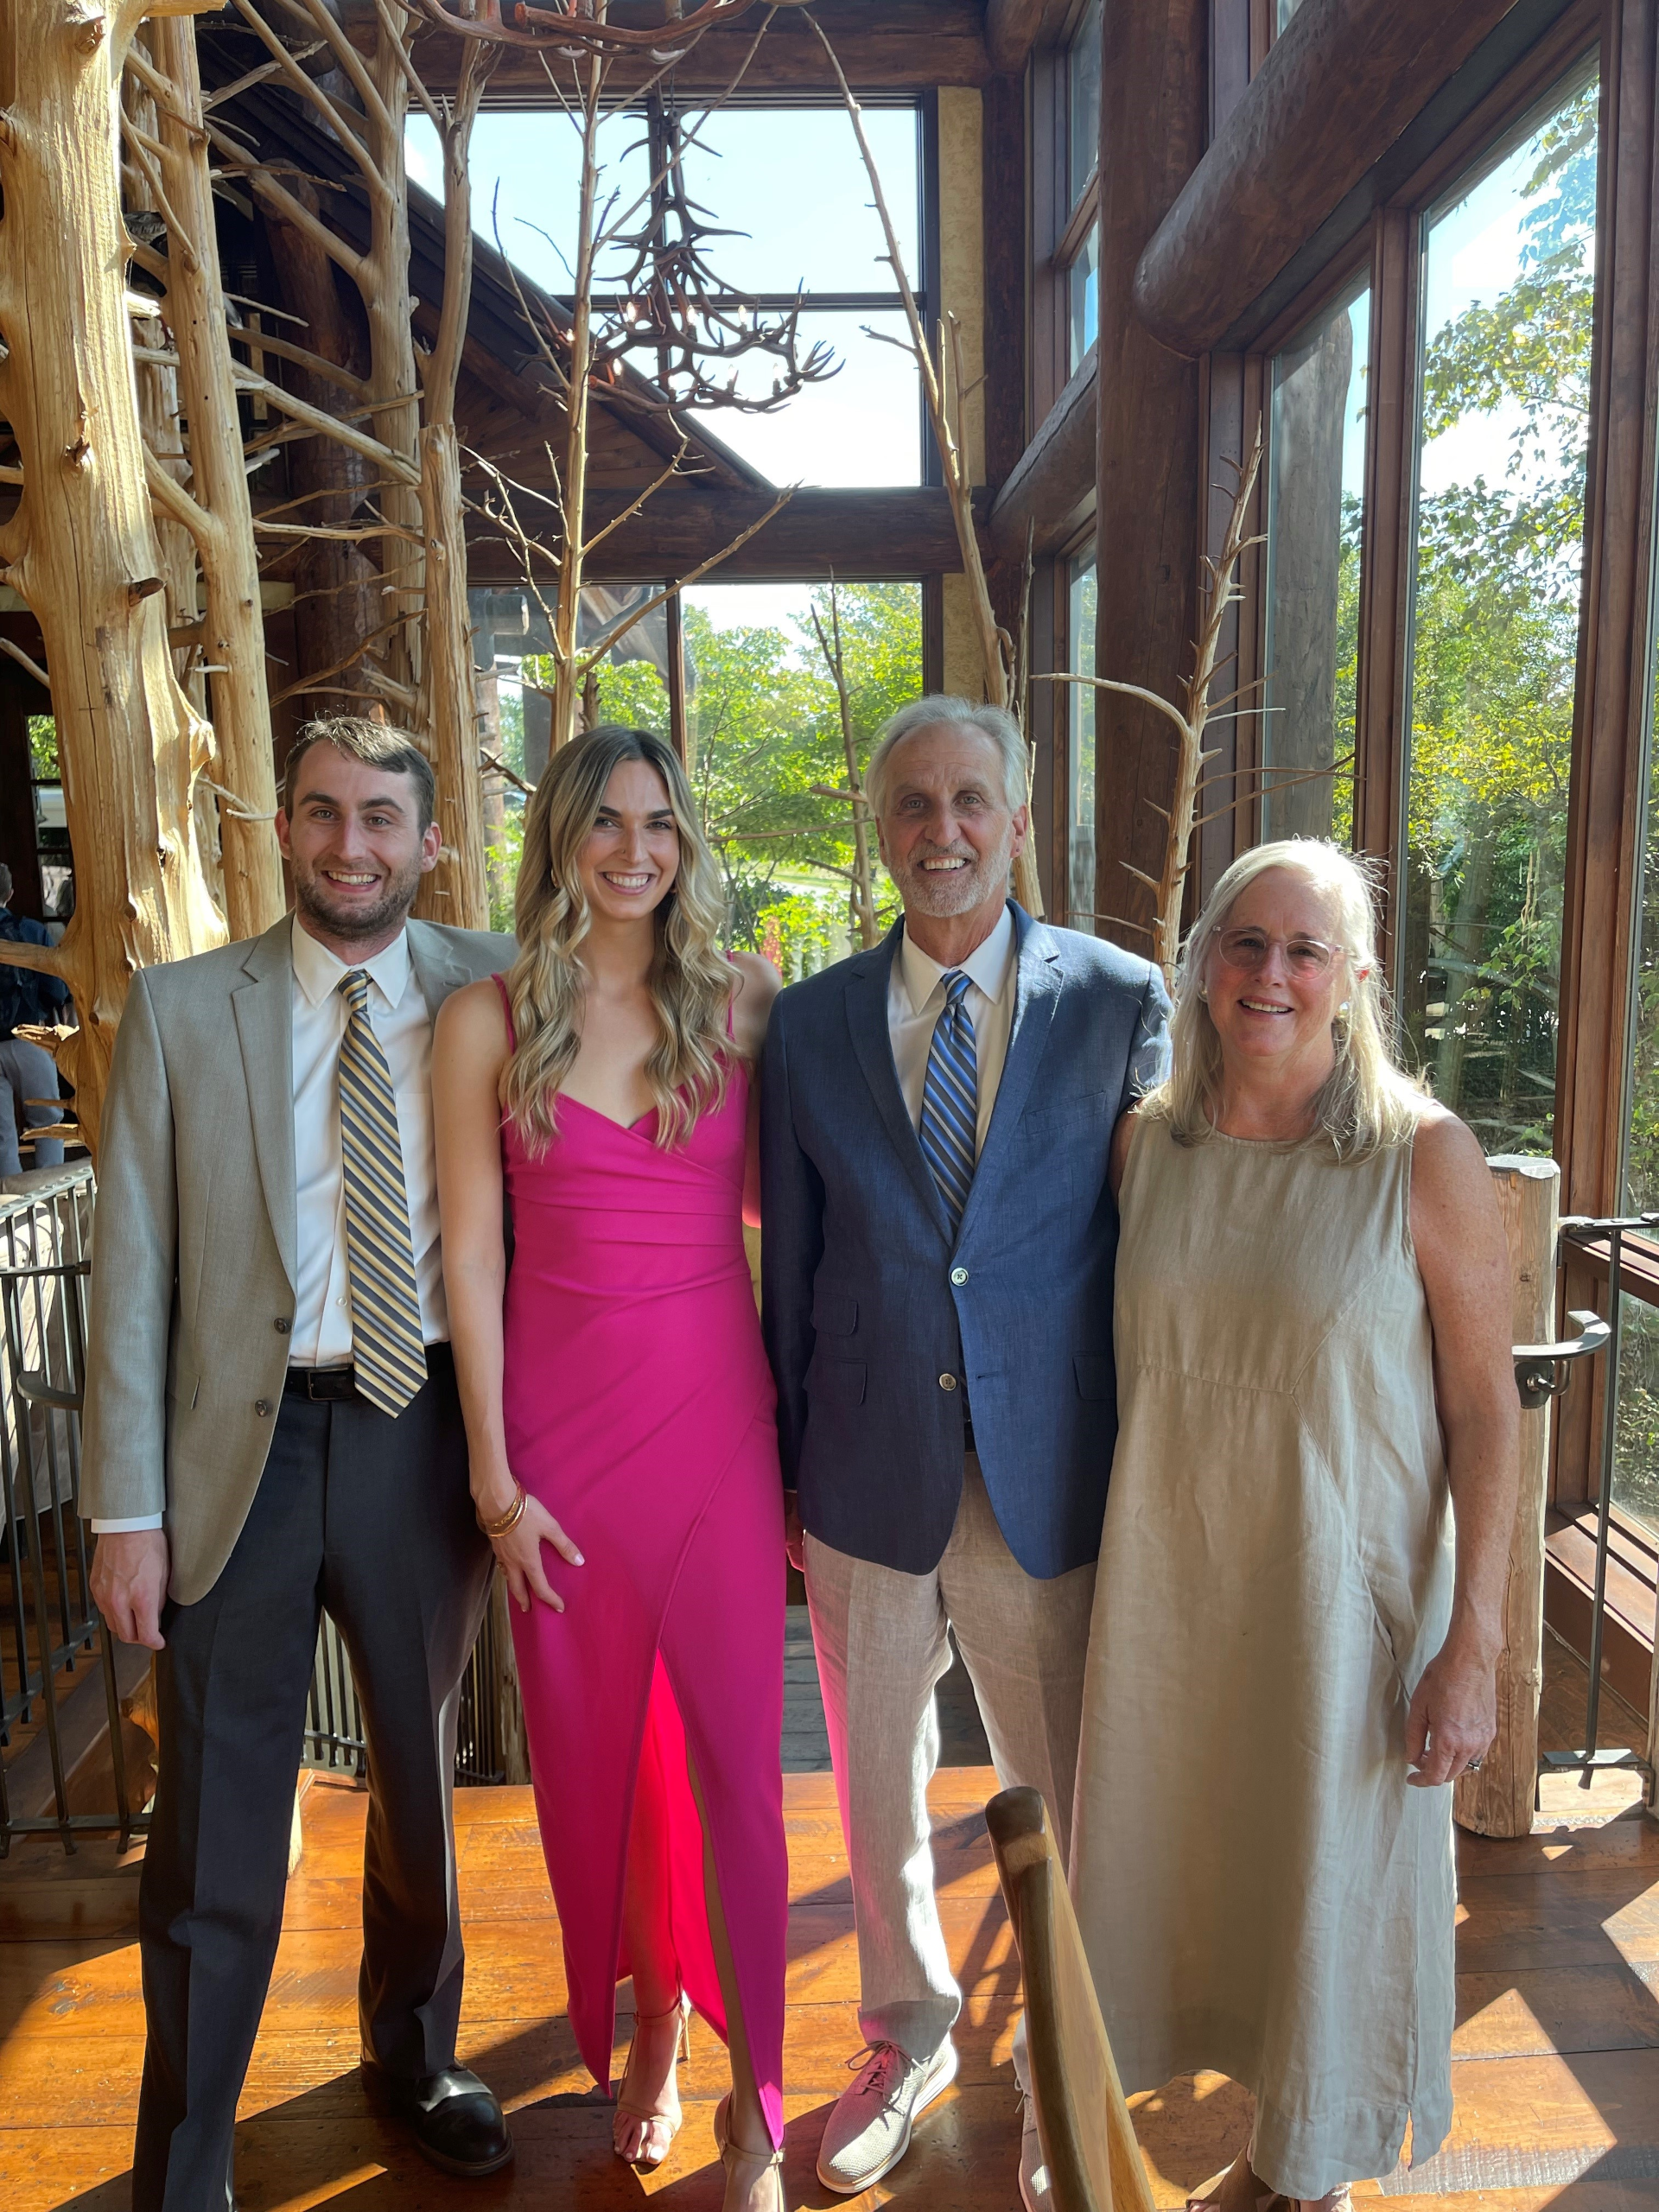 Dash with his parents, David and Kathleen, and sister Emmalie at a cousin’s wedding this past fall in Branson, Missouri.